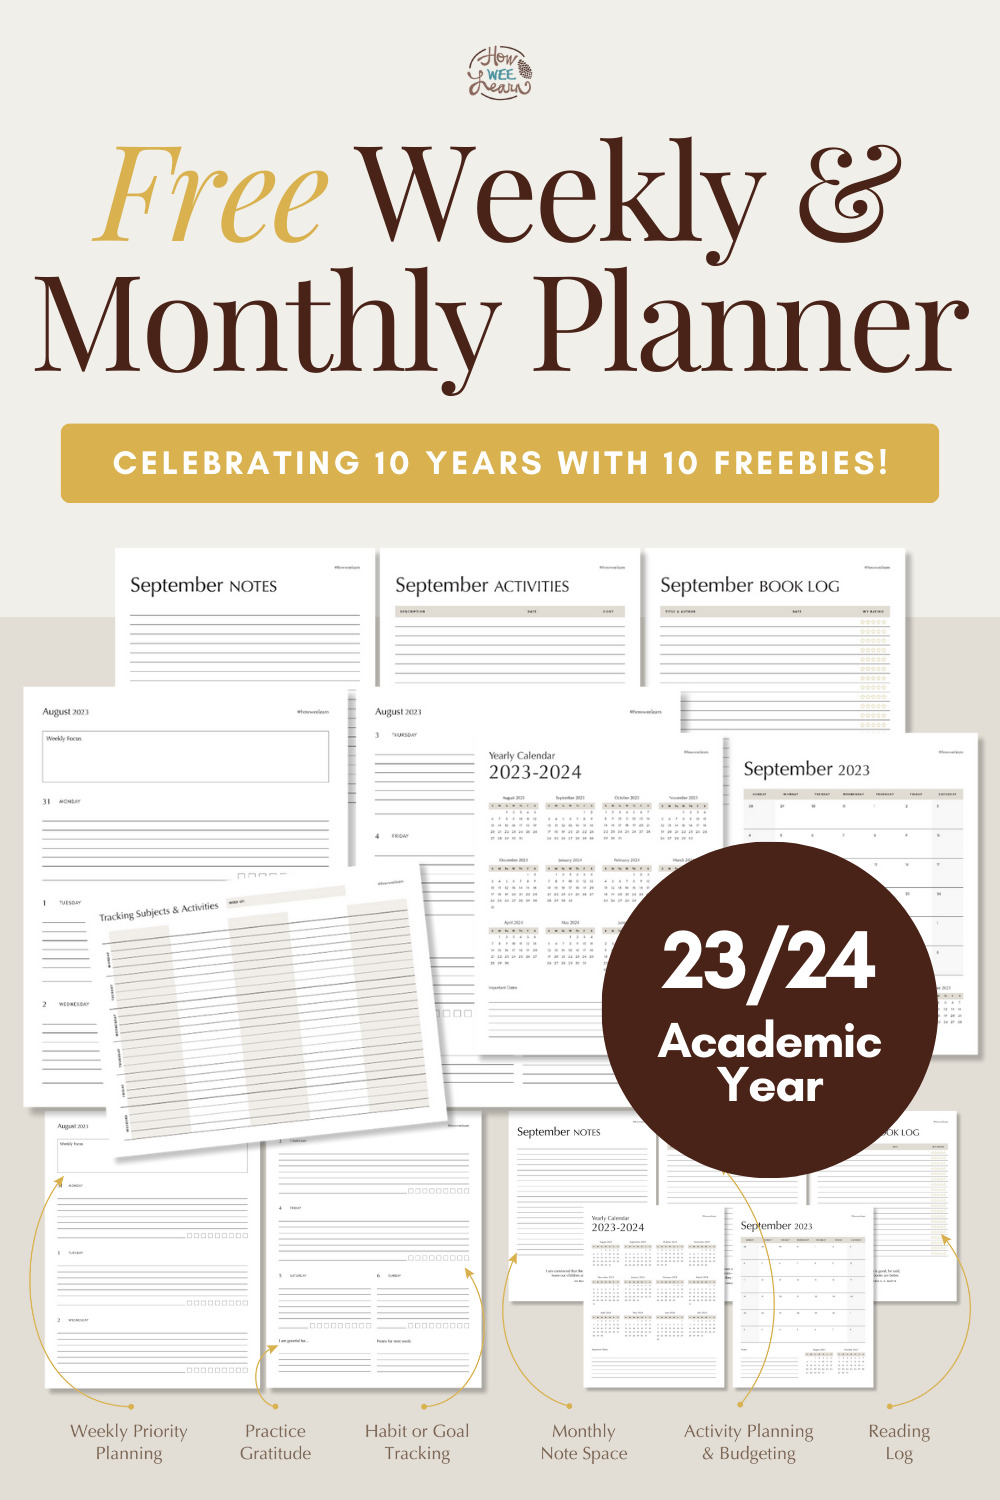 Free Weekly & Monthly Planner: 23/24 Academic Year